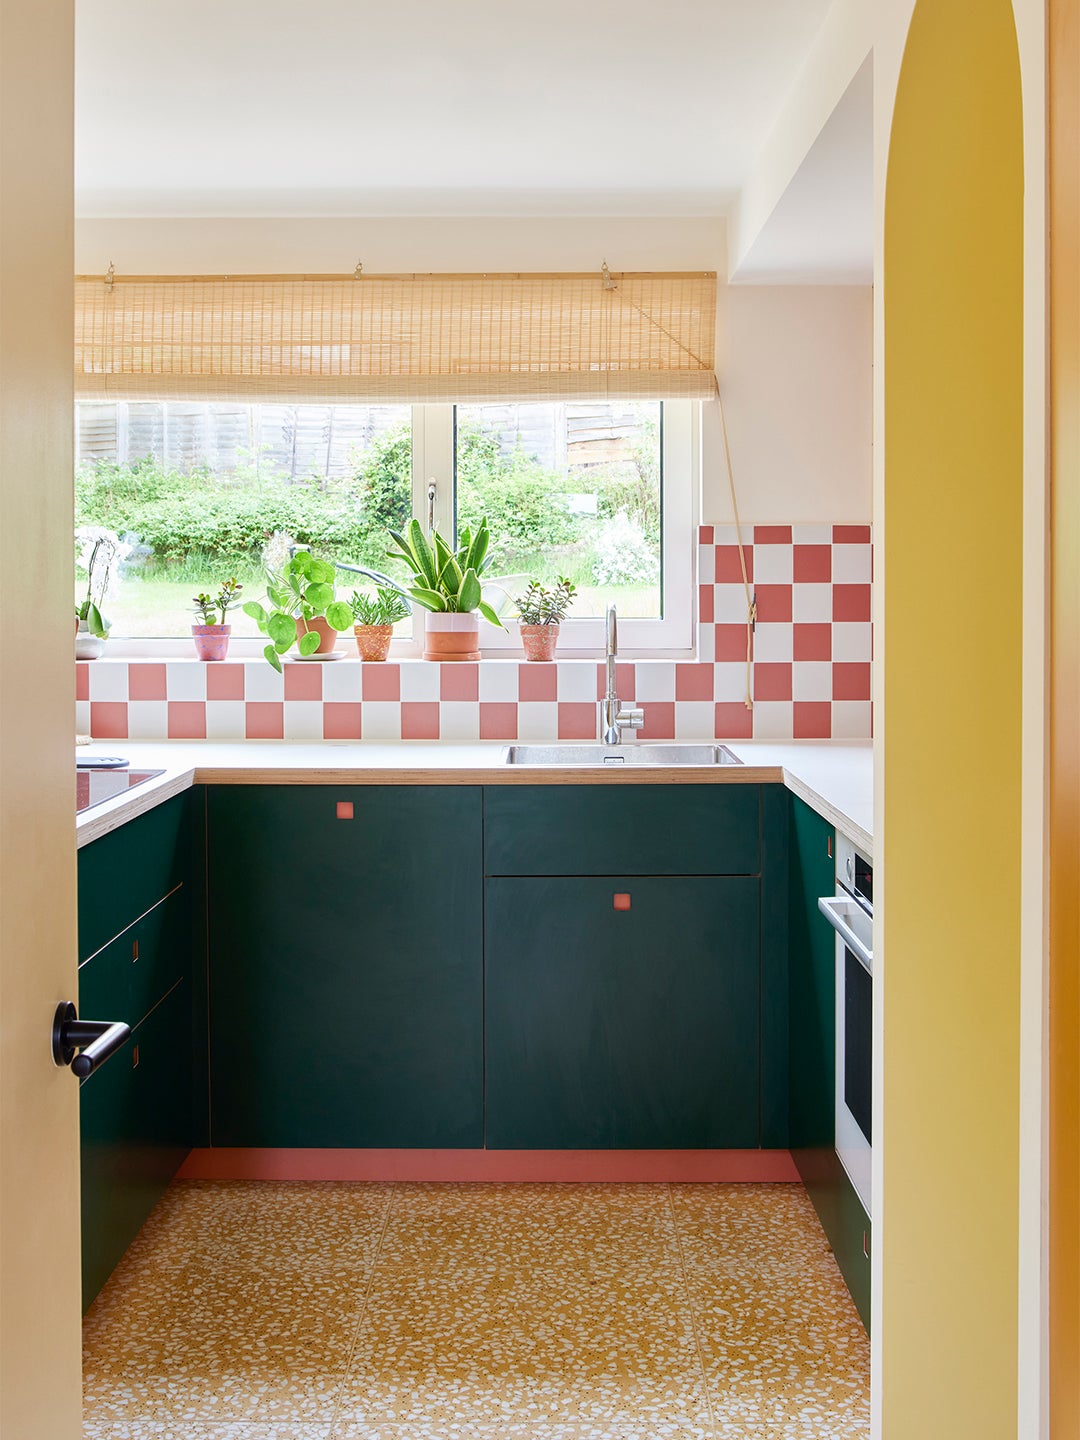 The Bold Bathroom Tile This Family Sold Their Designer on Ended Up in the Kitchen, Too